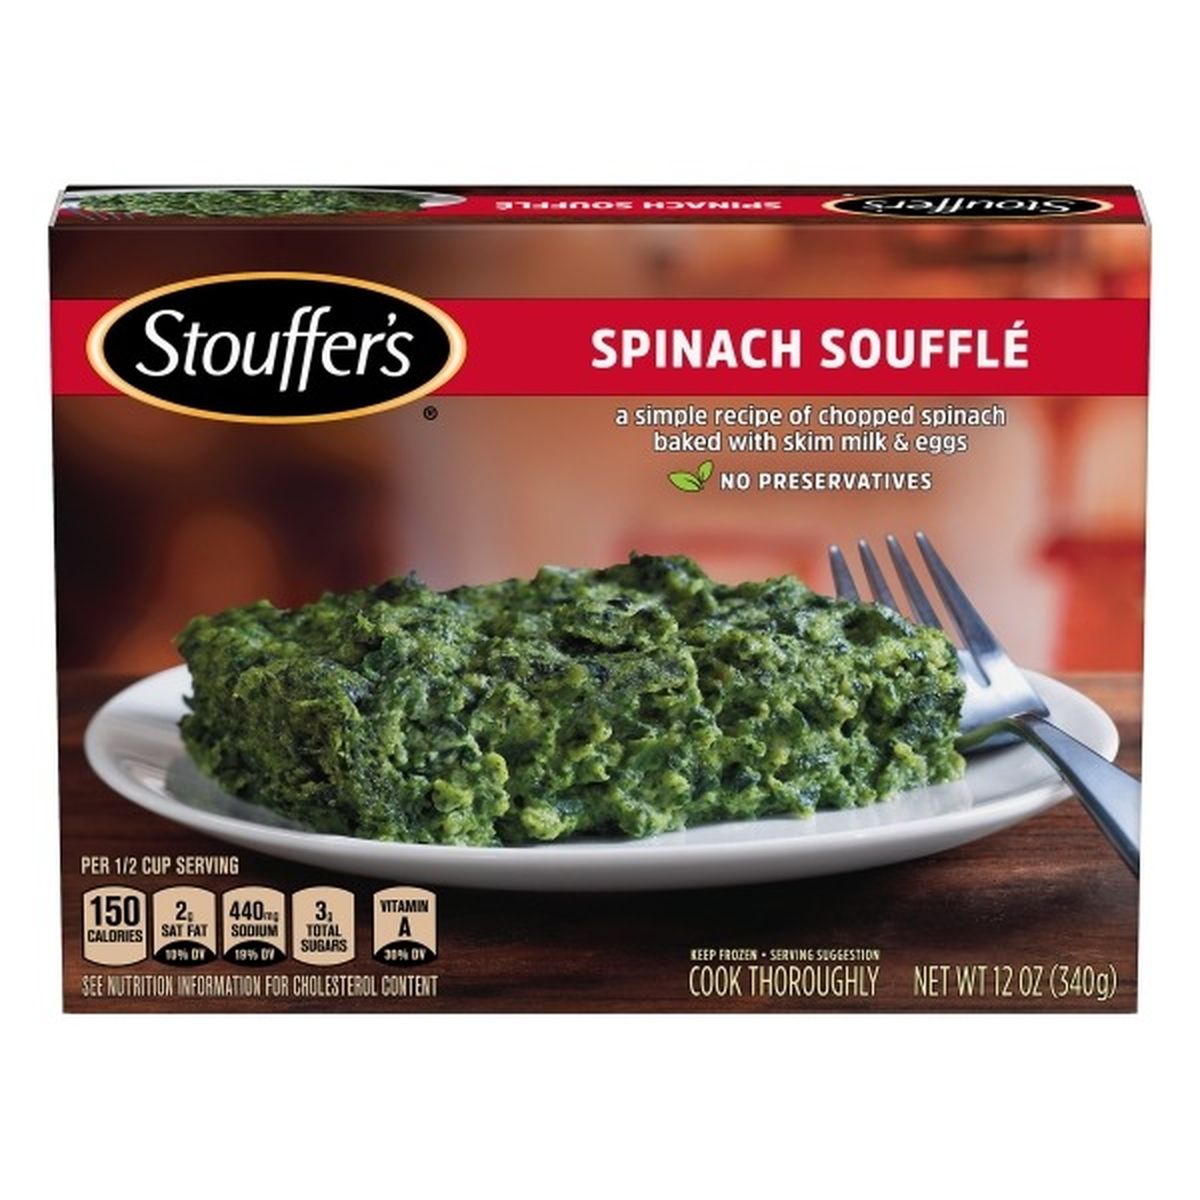 Calories in Stouffer's Spinach Souffle